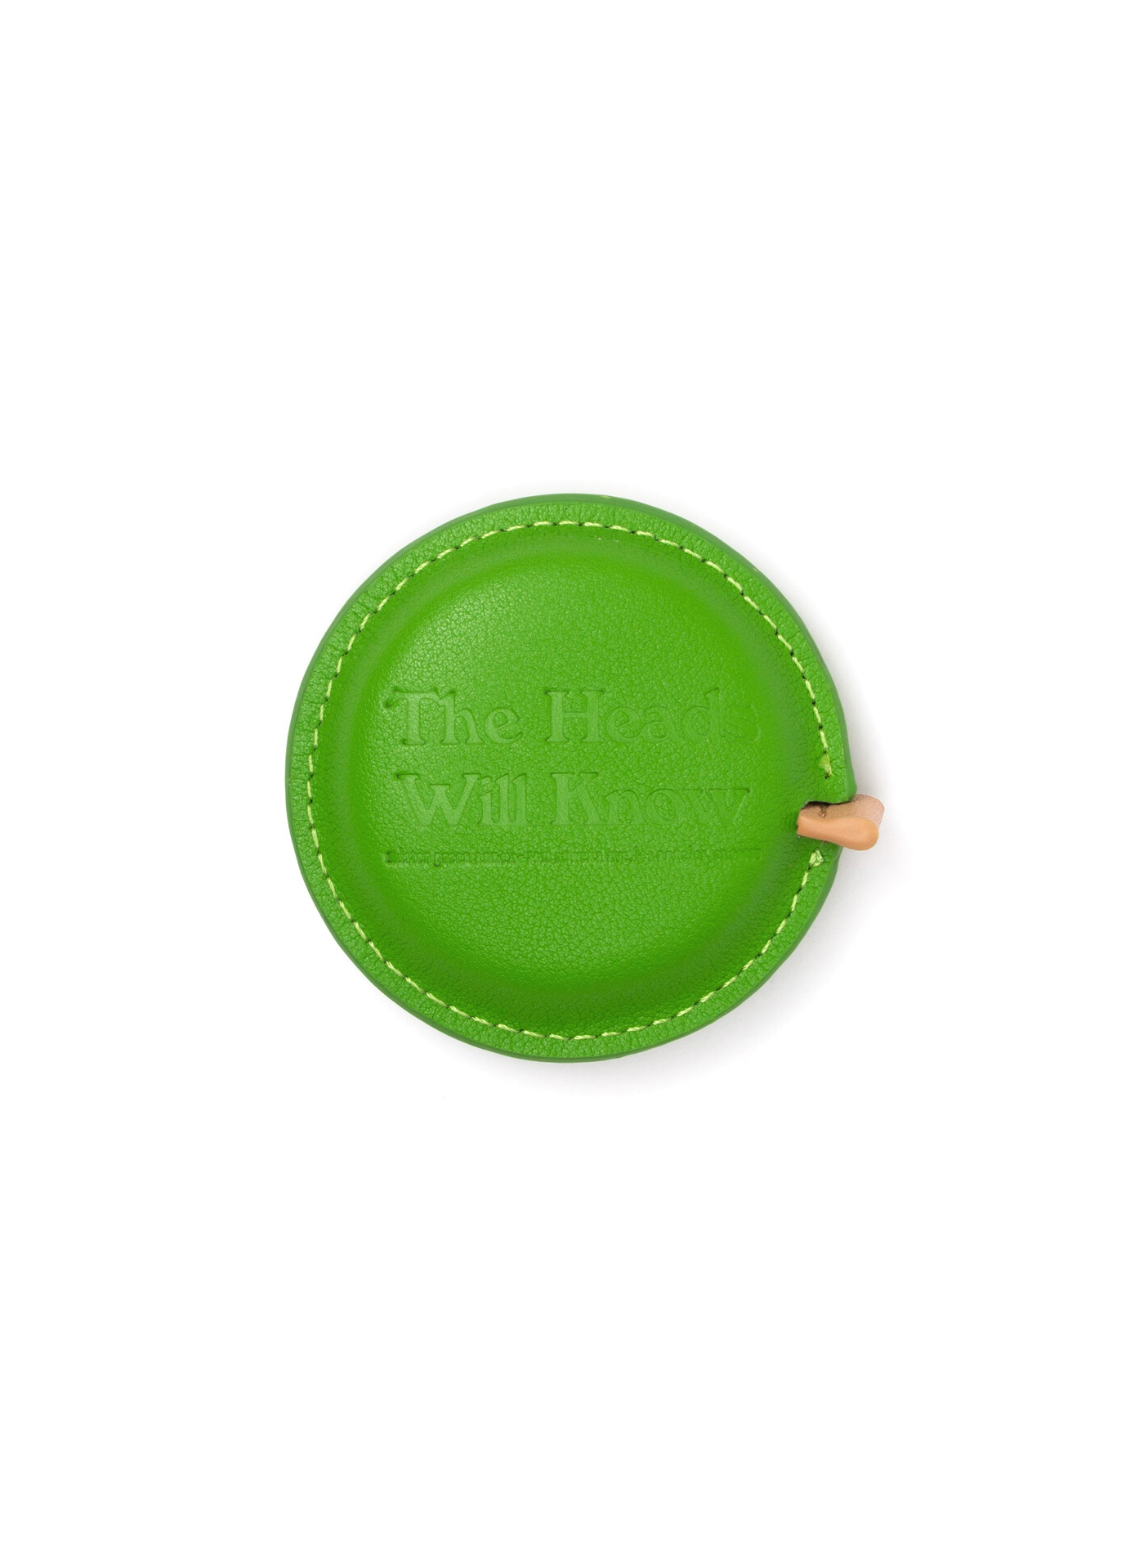 Retractable Leather Tape Measure - Green-Mister Green-Mister Green